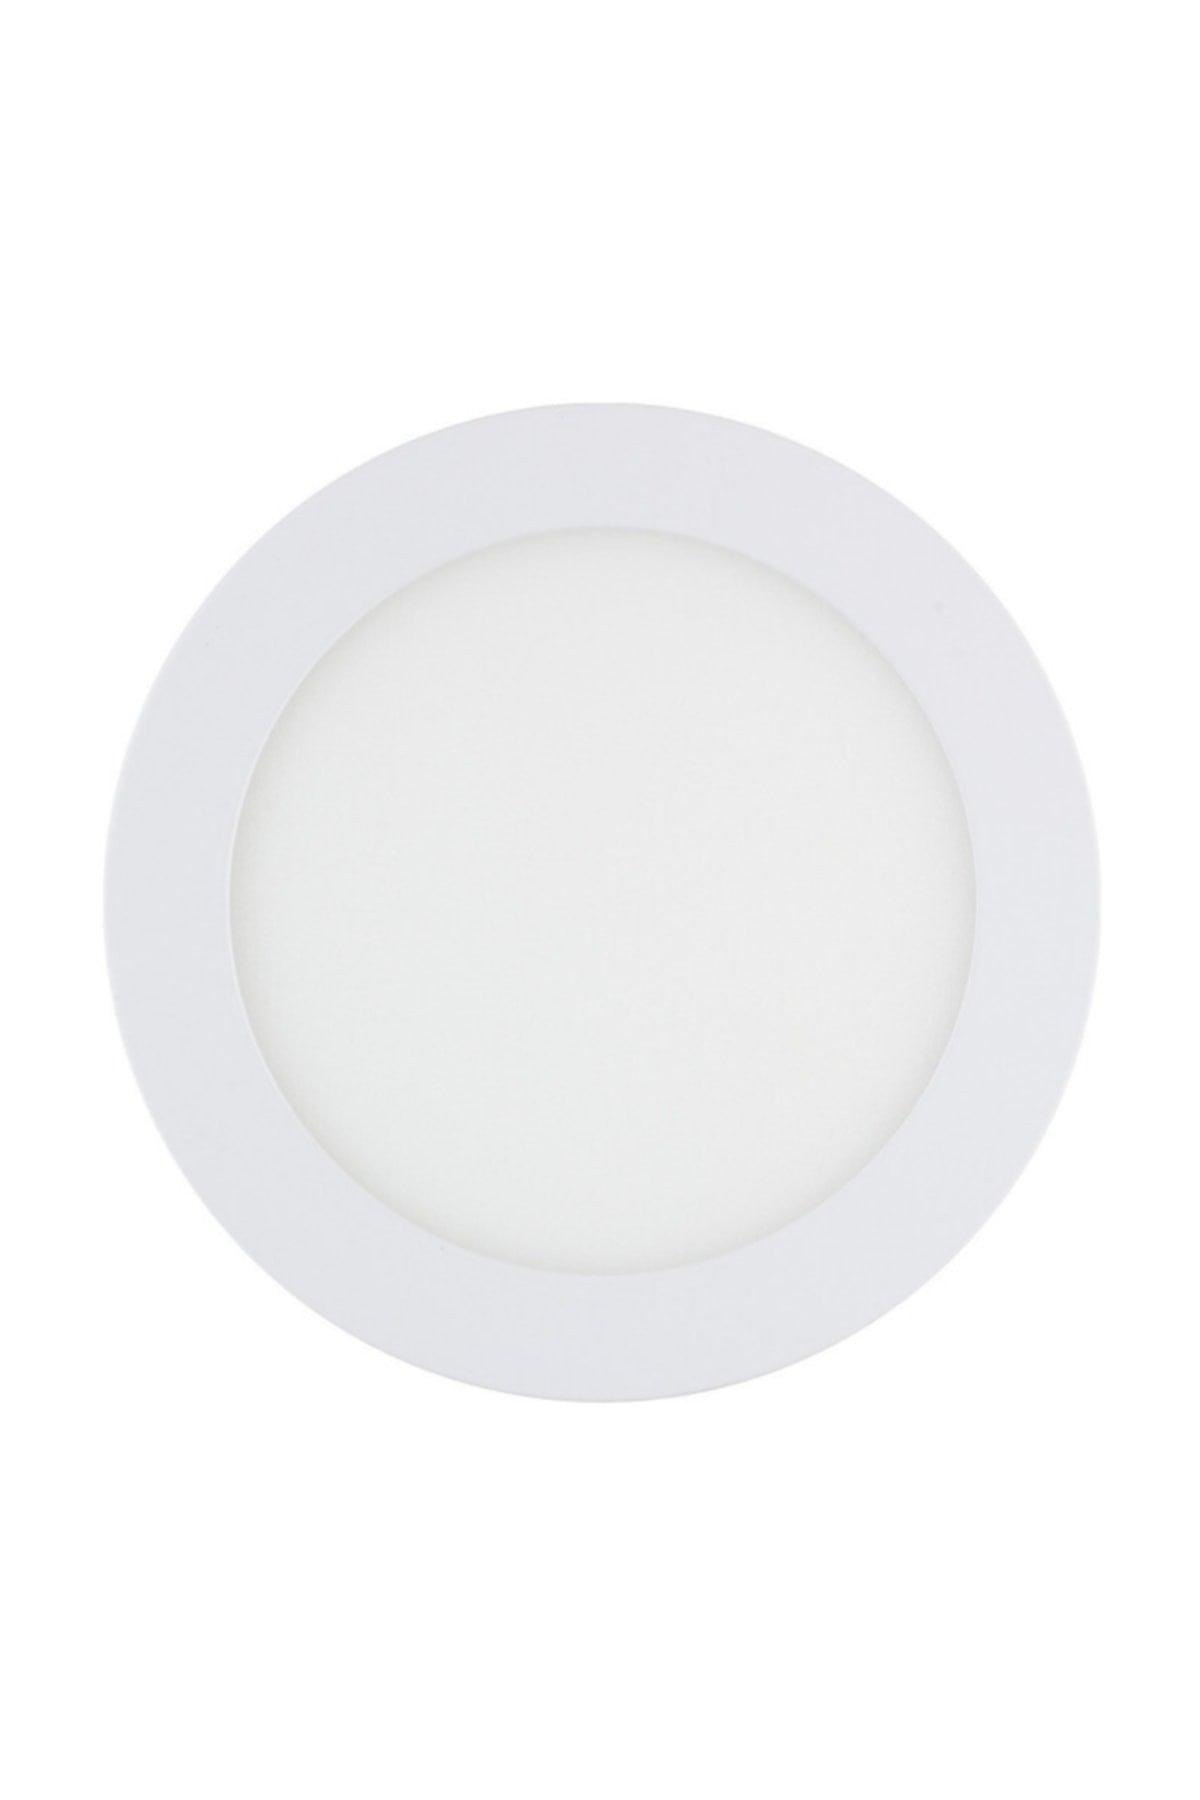 9w Recessed Led Panel Deluxe Natural(10pcs)